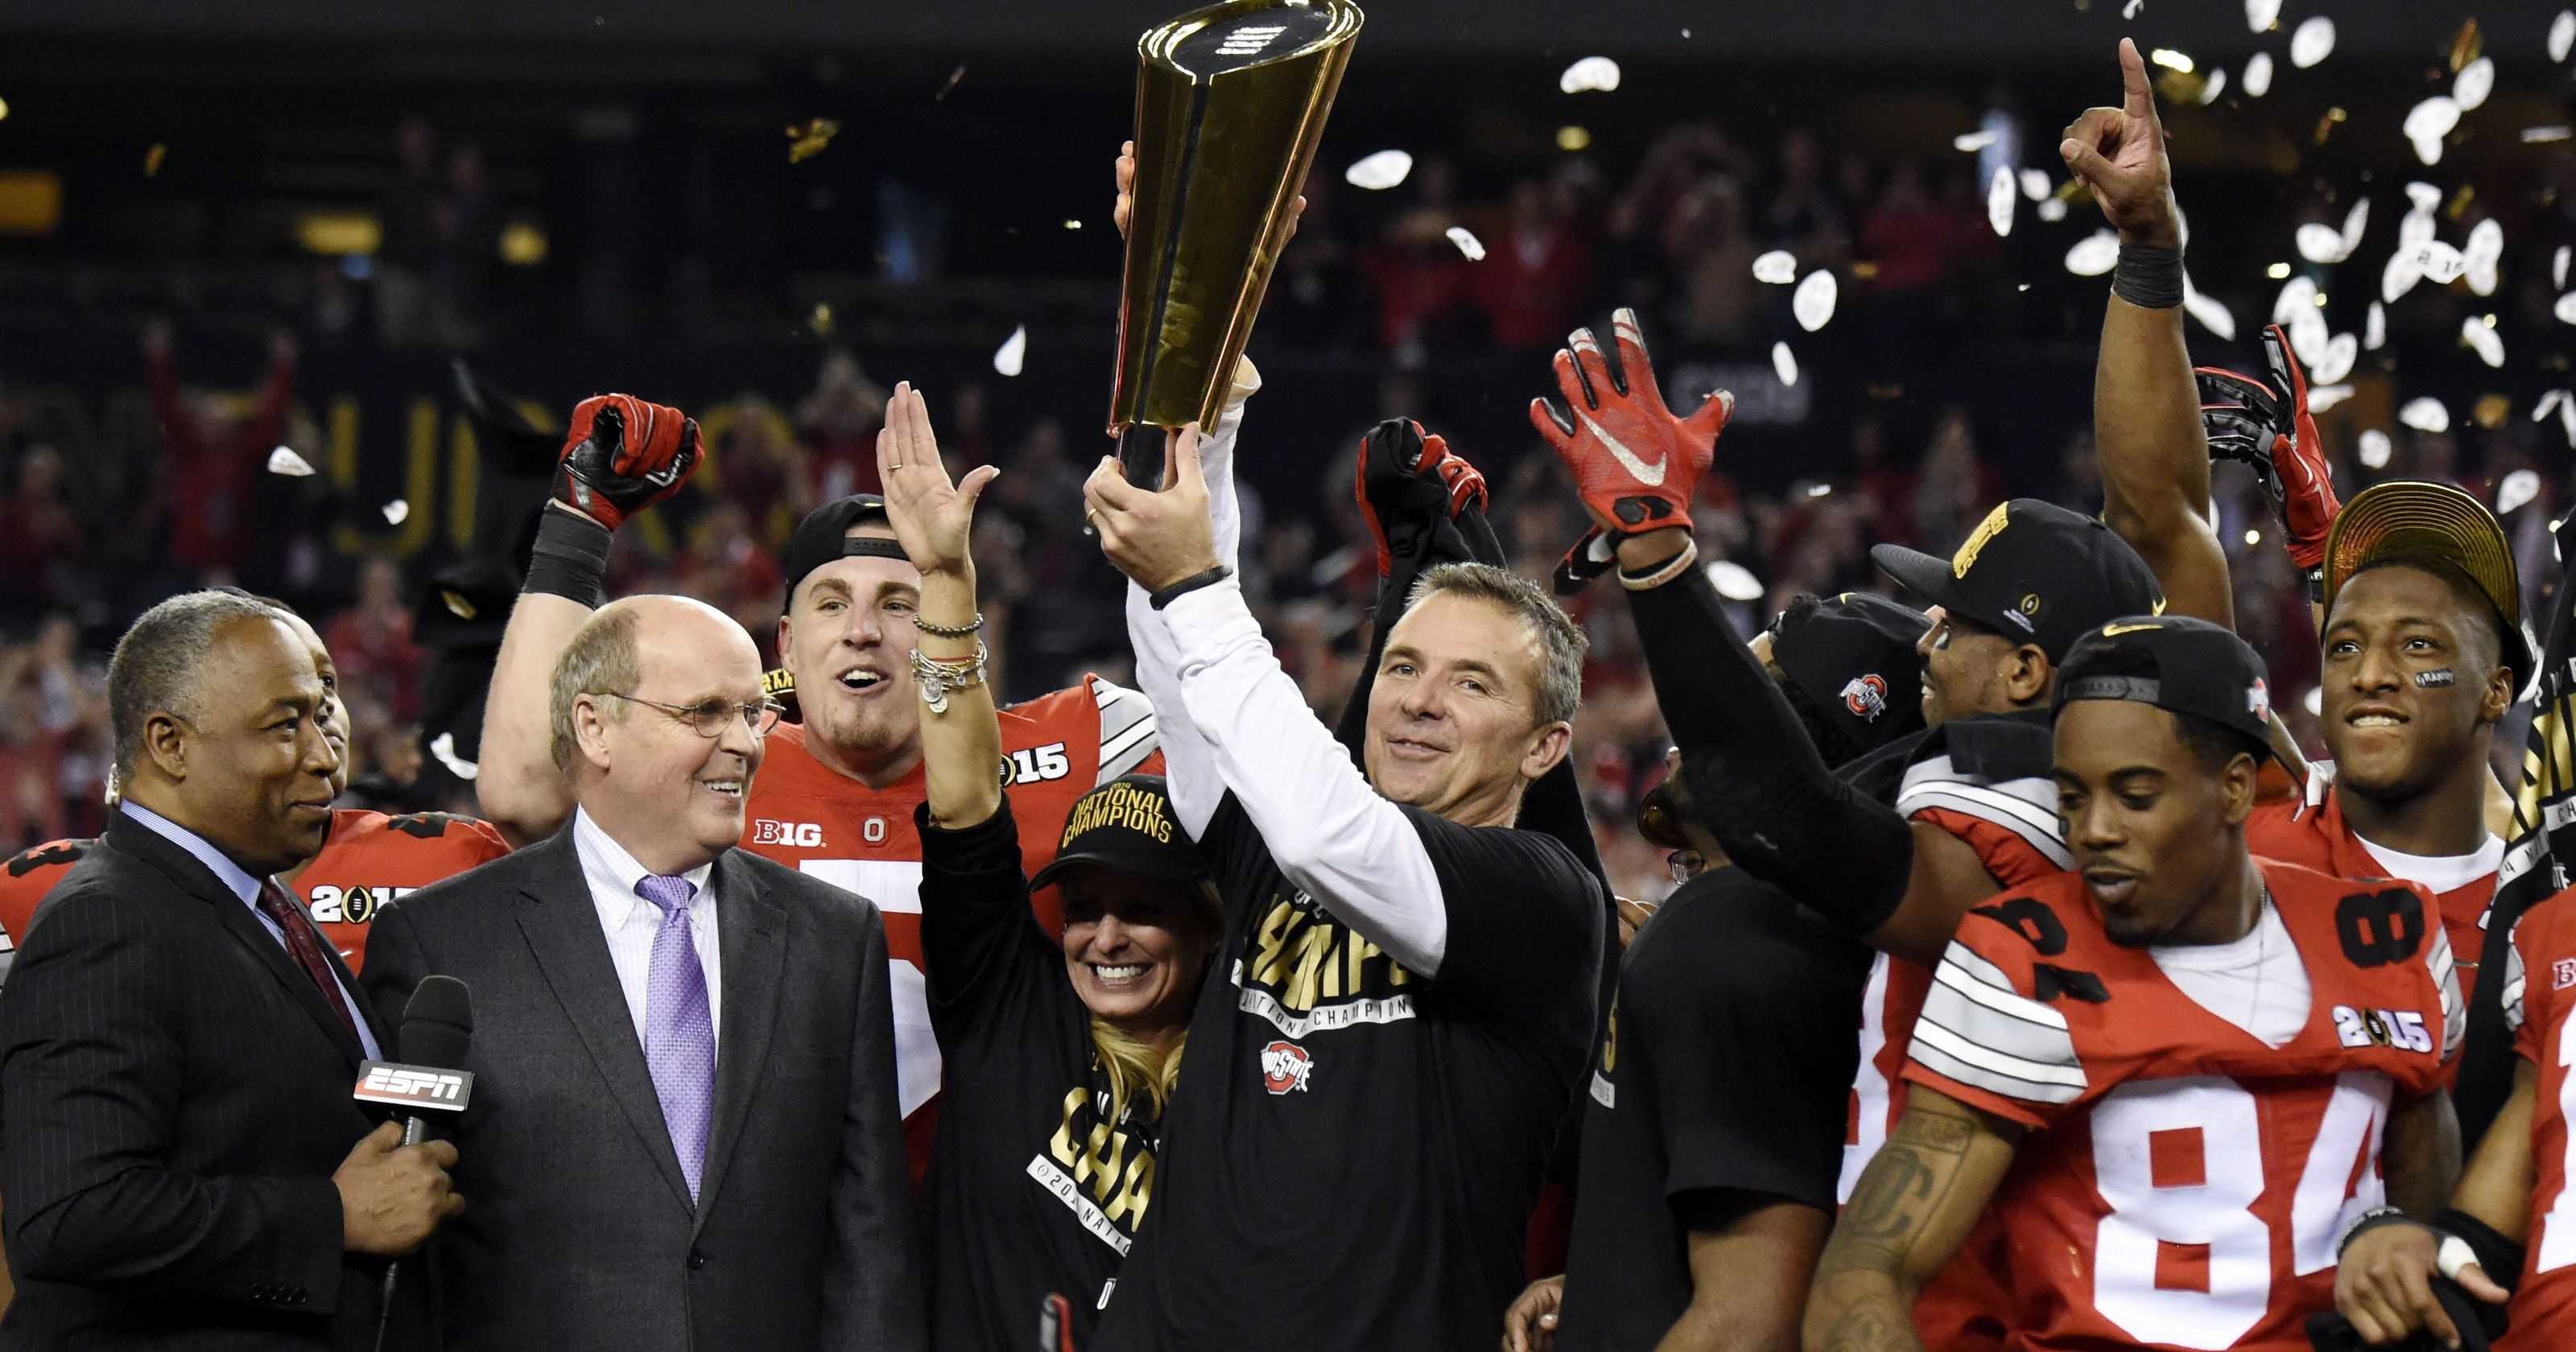 Urban Meyer holds the CFP trophy with Ohio State